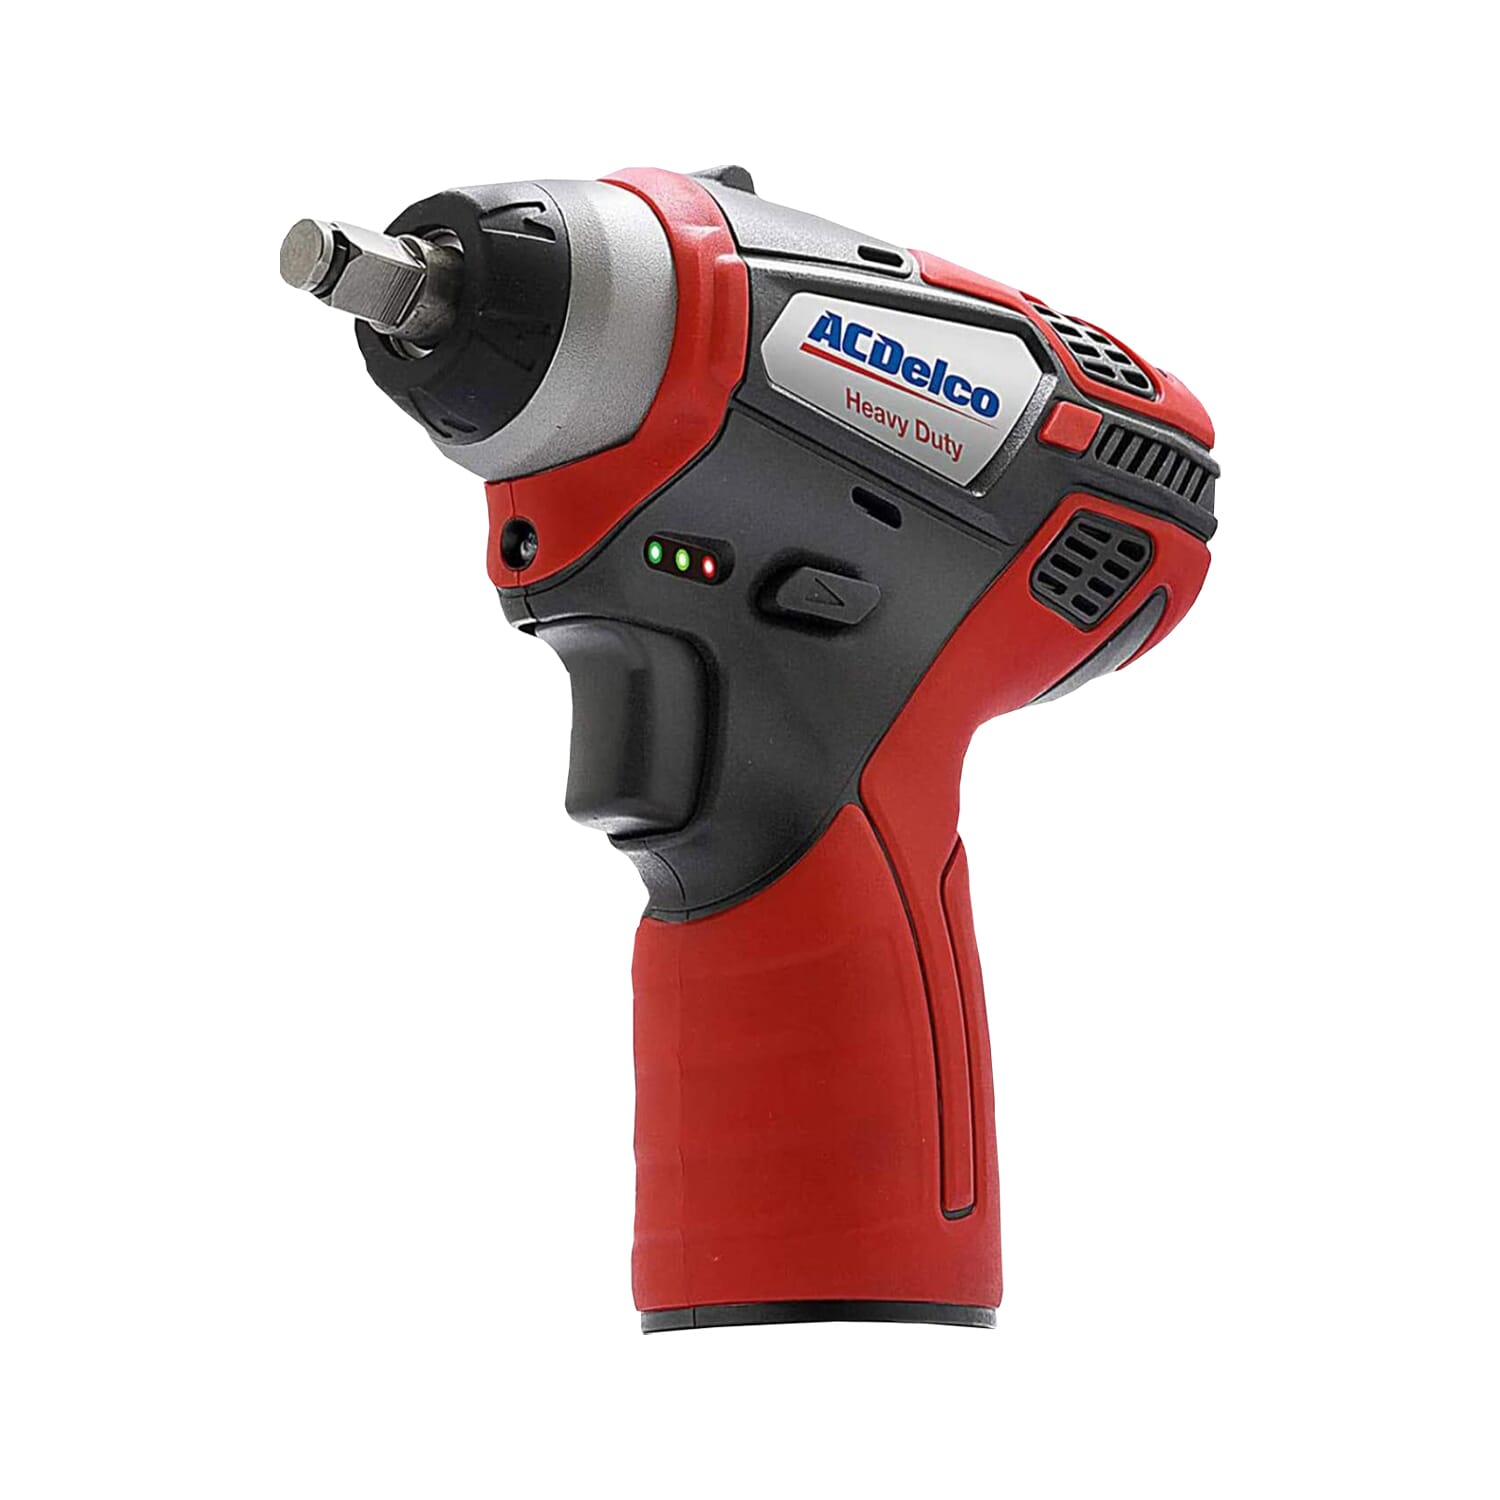 ARI12104T G12 Lithium-Ion 12V 3/8" Impact Wrench - Tool Only